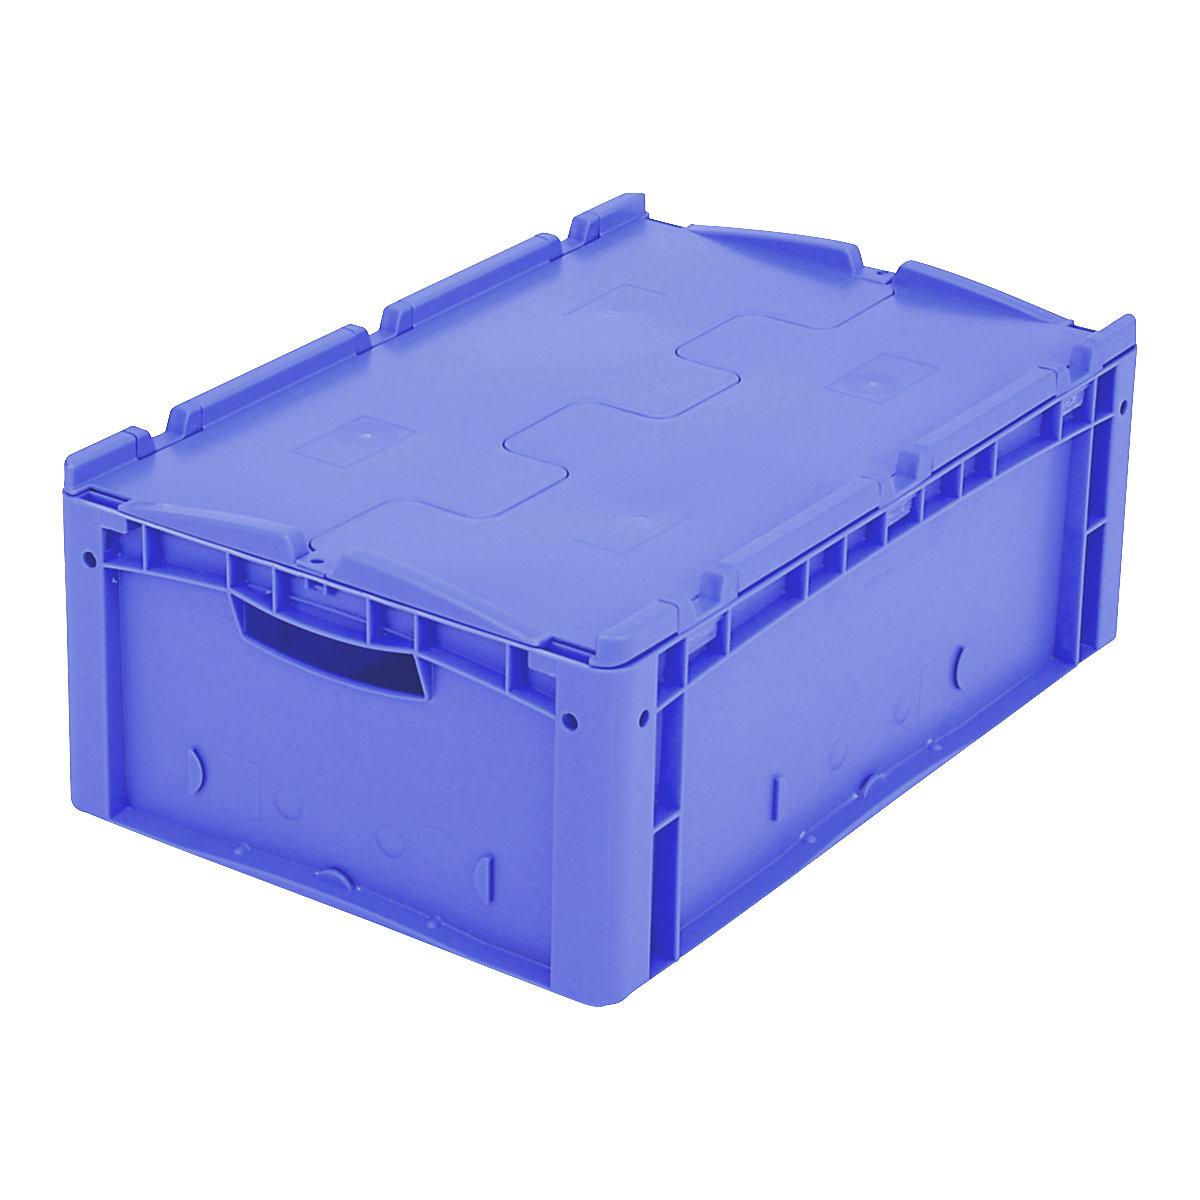 XL Euro stacking container – BITO, with 2-section hinged lid, LxWxH 600 x 400 x 238 mm-10